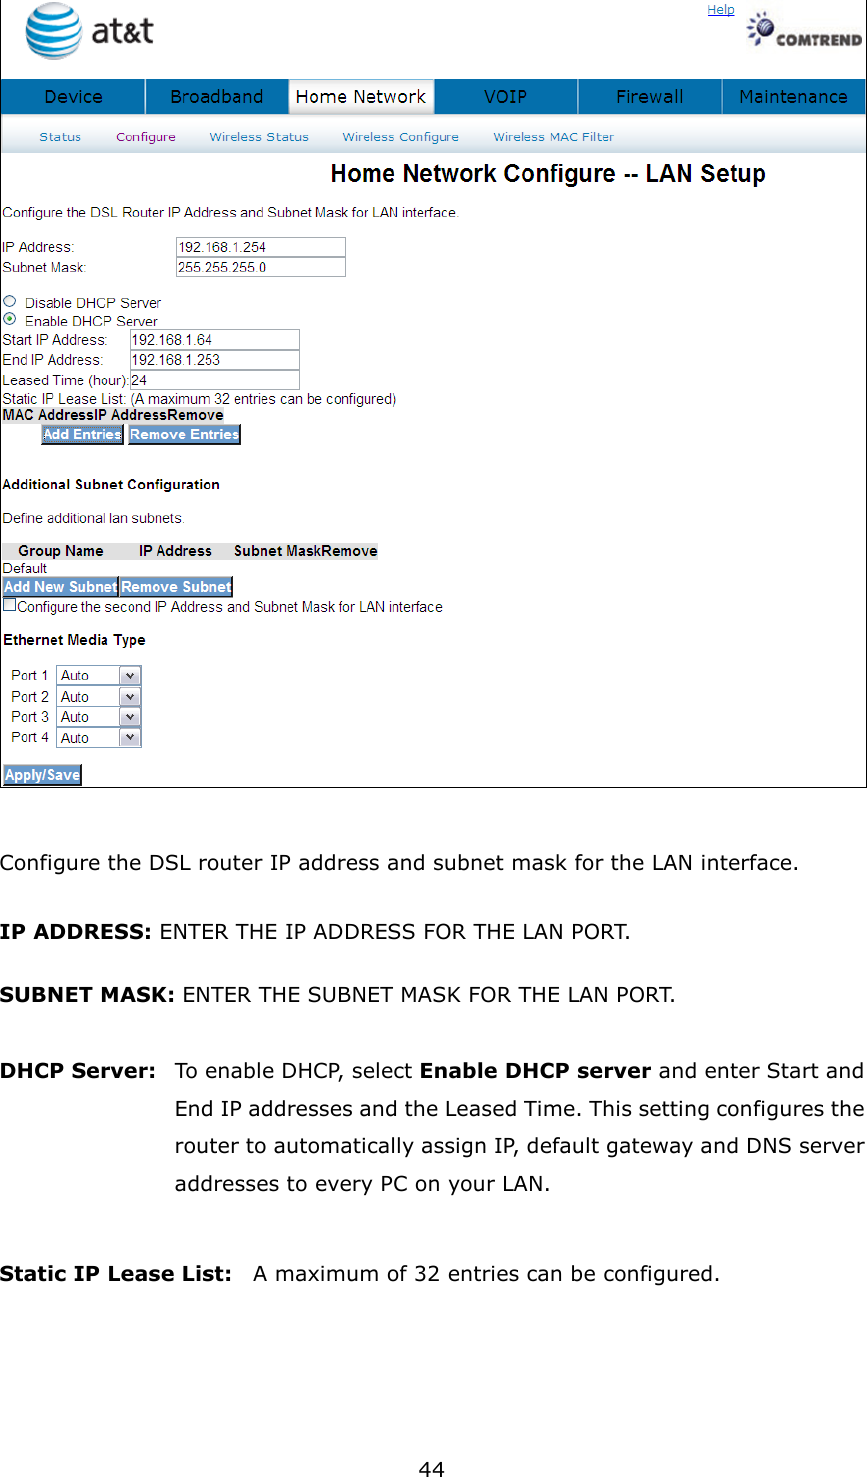 44   Configure the DSL router IP address and subnet mask for the LAN interface. IP ADDRESS: ENTER THE IP ADDRESS FOR THE LAN PORT. SUBNET MASK: ENTER THE SUBNET MASK FOR THE LAN PORT.  DHCP Server:   To enable DHCP, select Enable DHCP server and enter Start and End IP addresses and the Leased Time. This setting configures the router to automatically assign IP, default gateway and DNS server addresses to every PC on your LAN.  Static IP Lease List:    A maximum of 32 entries can be configured.    